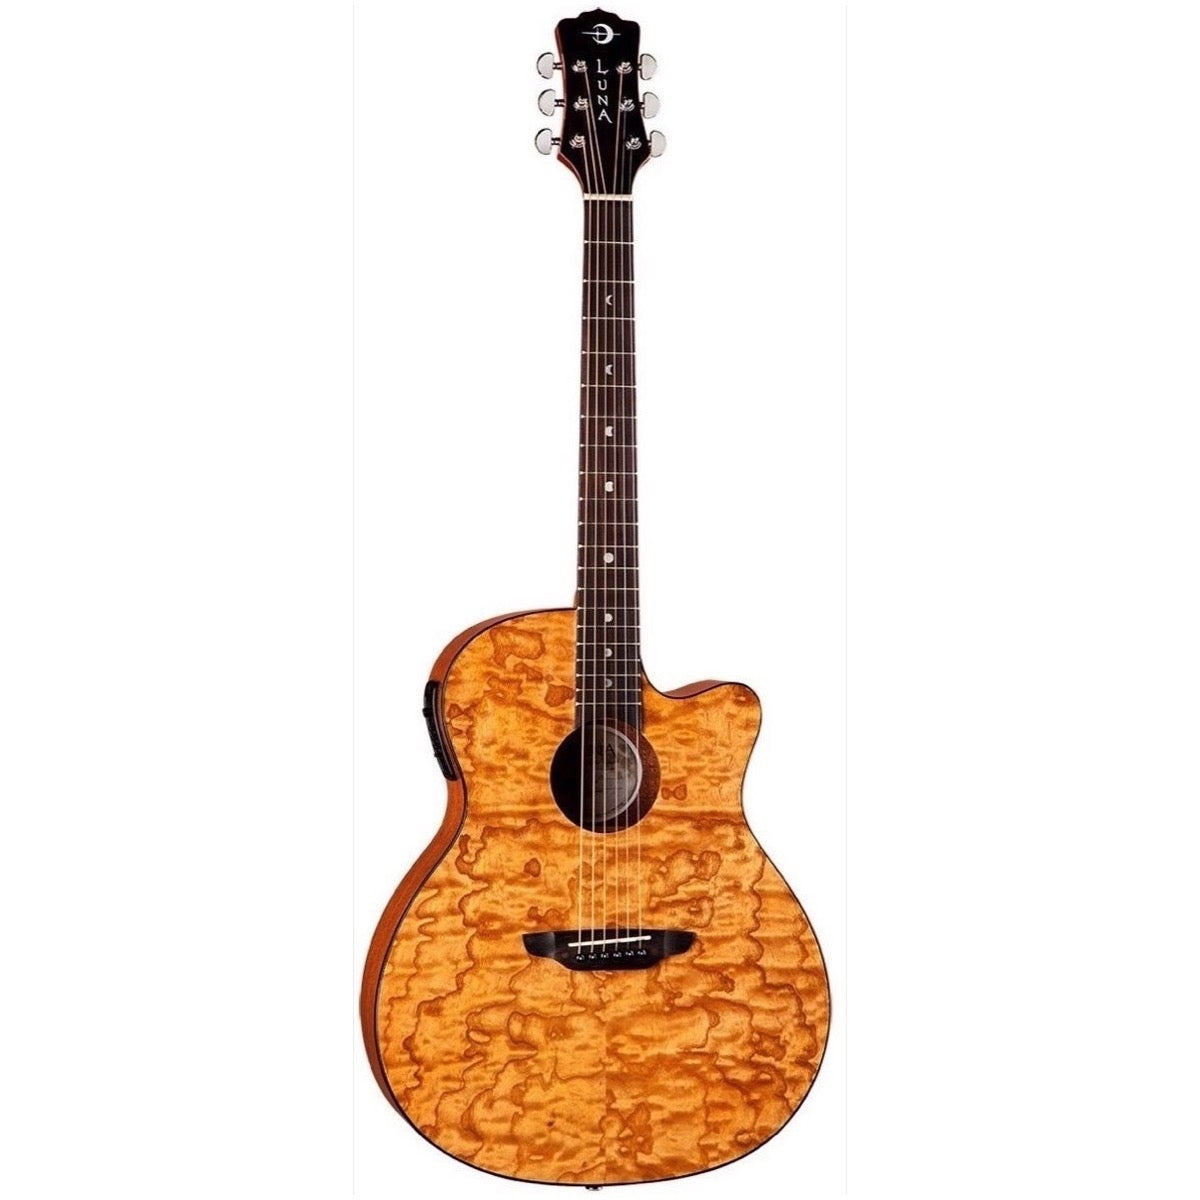 Luna Gypsy Quilt Top Acoustic-Electric Guitar, Gloss Natural